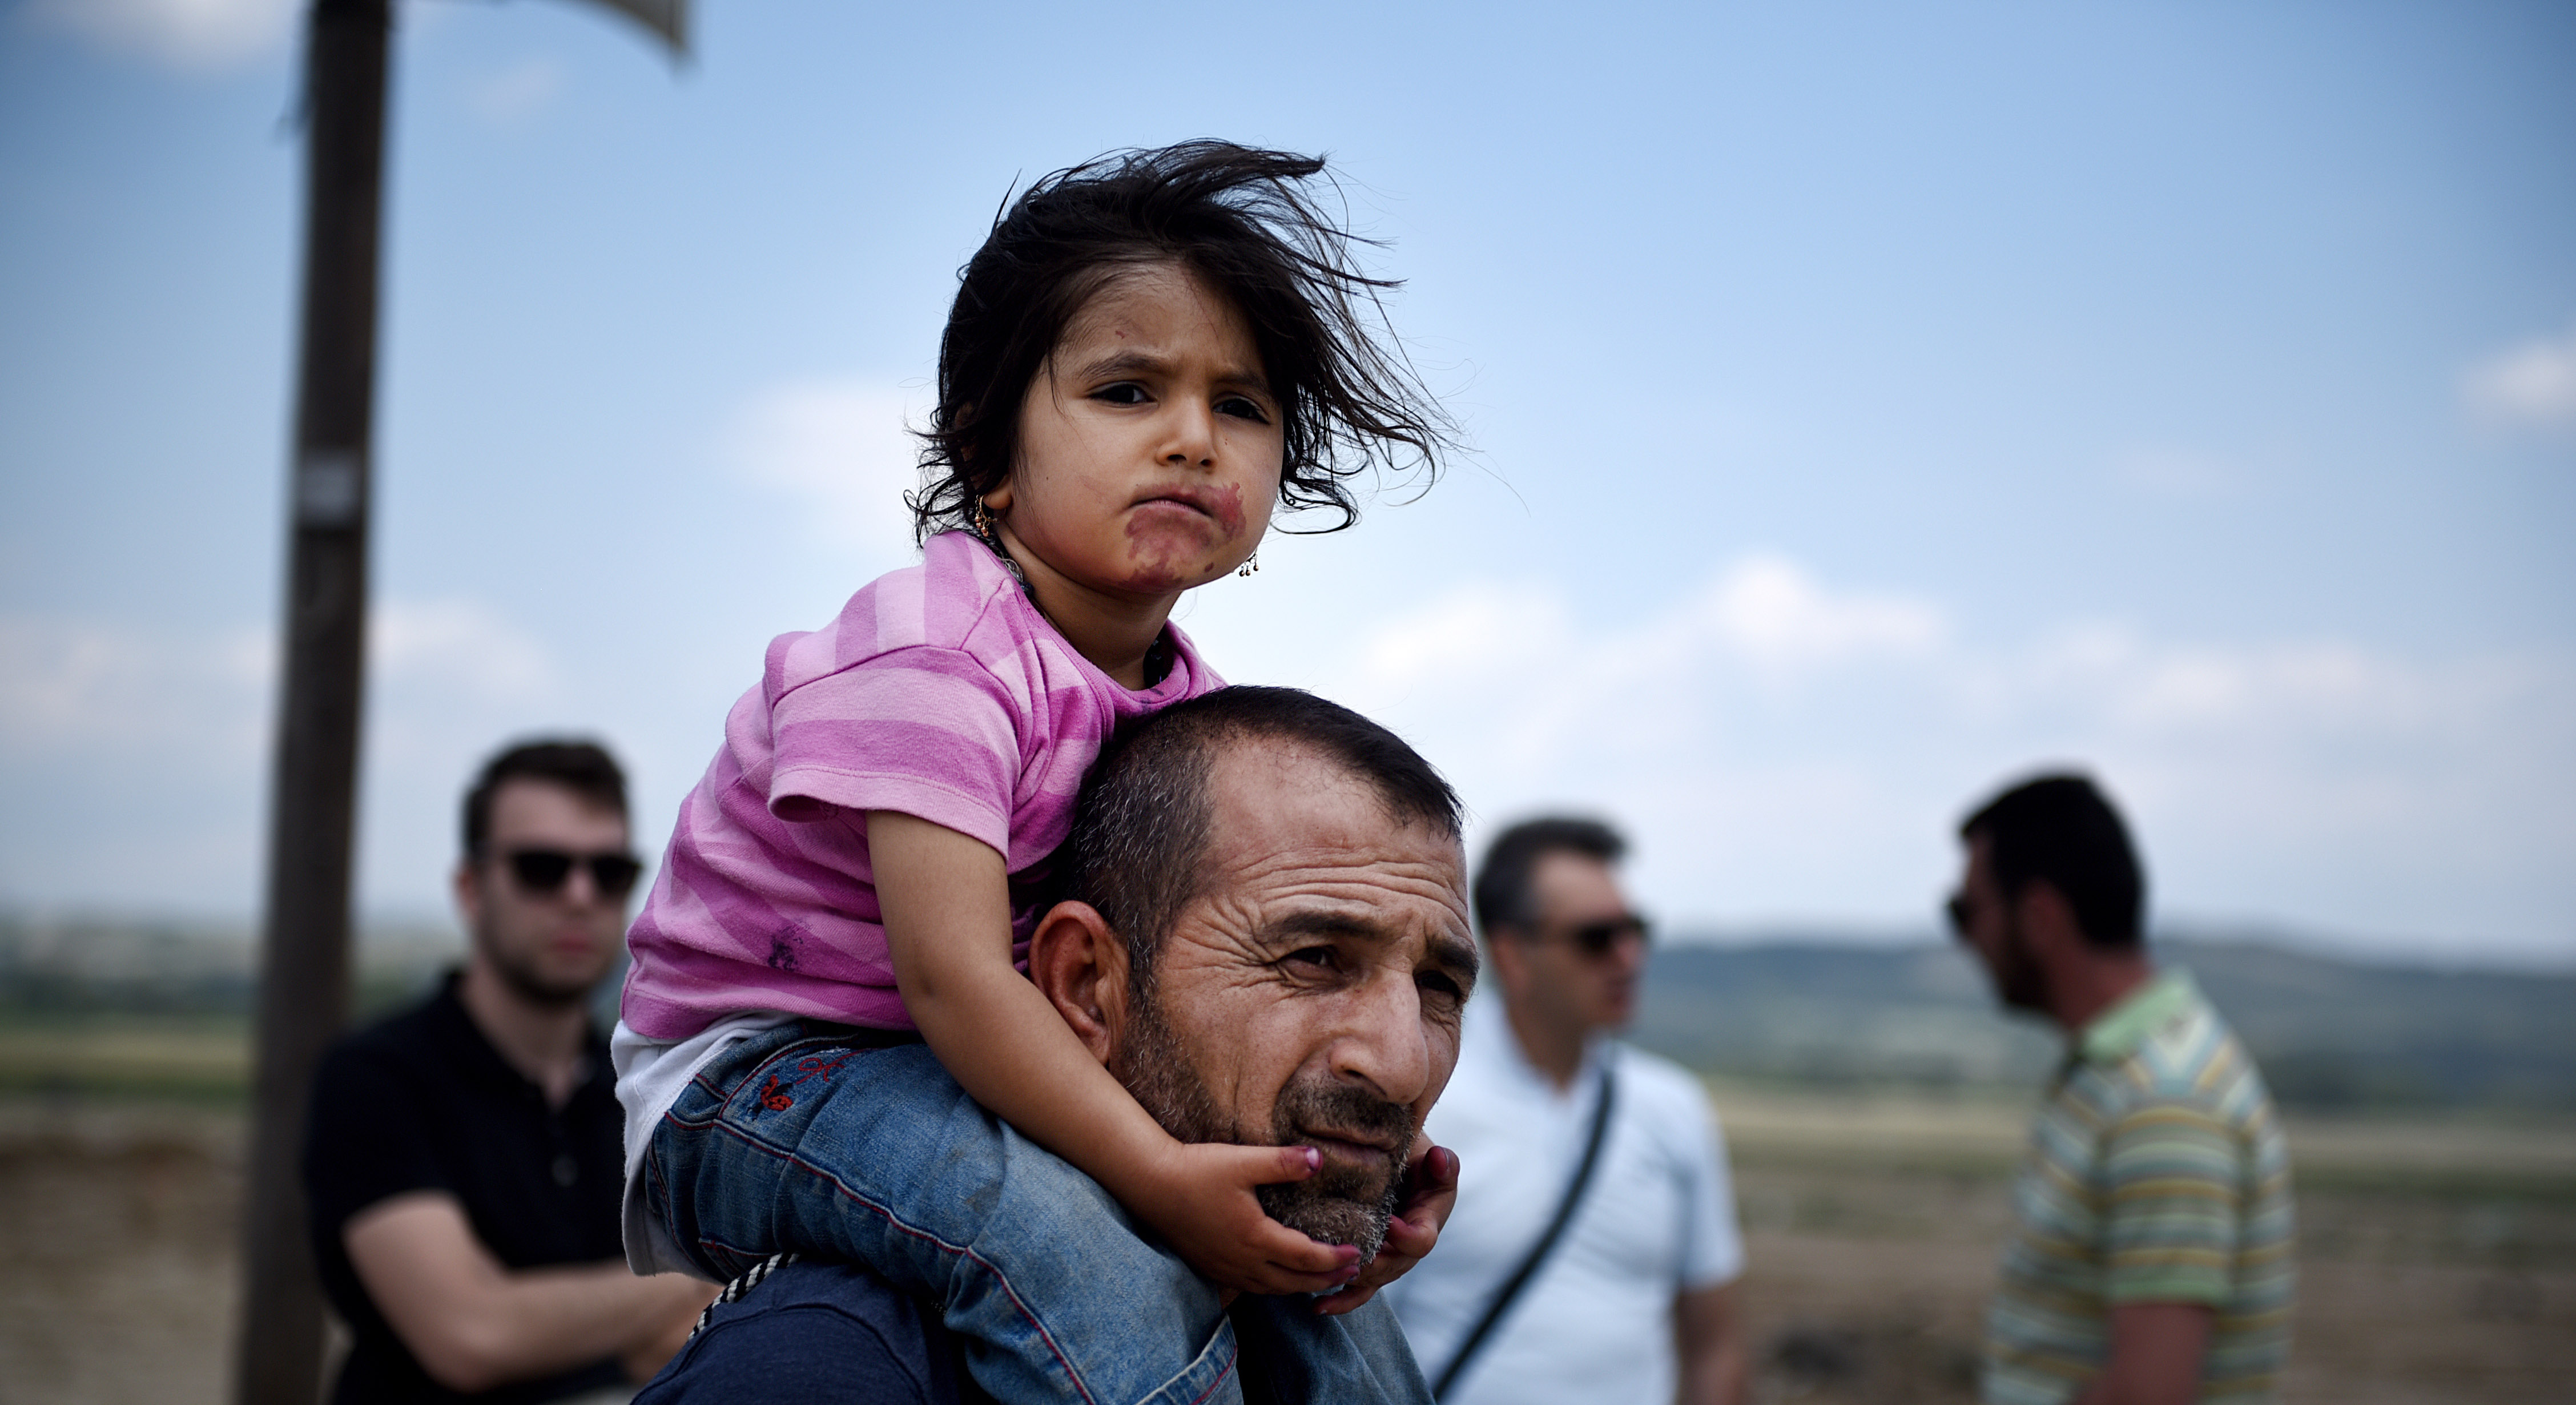 Help save the lives of 10,000 people who escaped ISIS in Syria